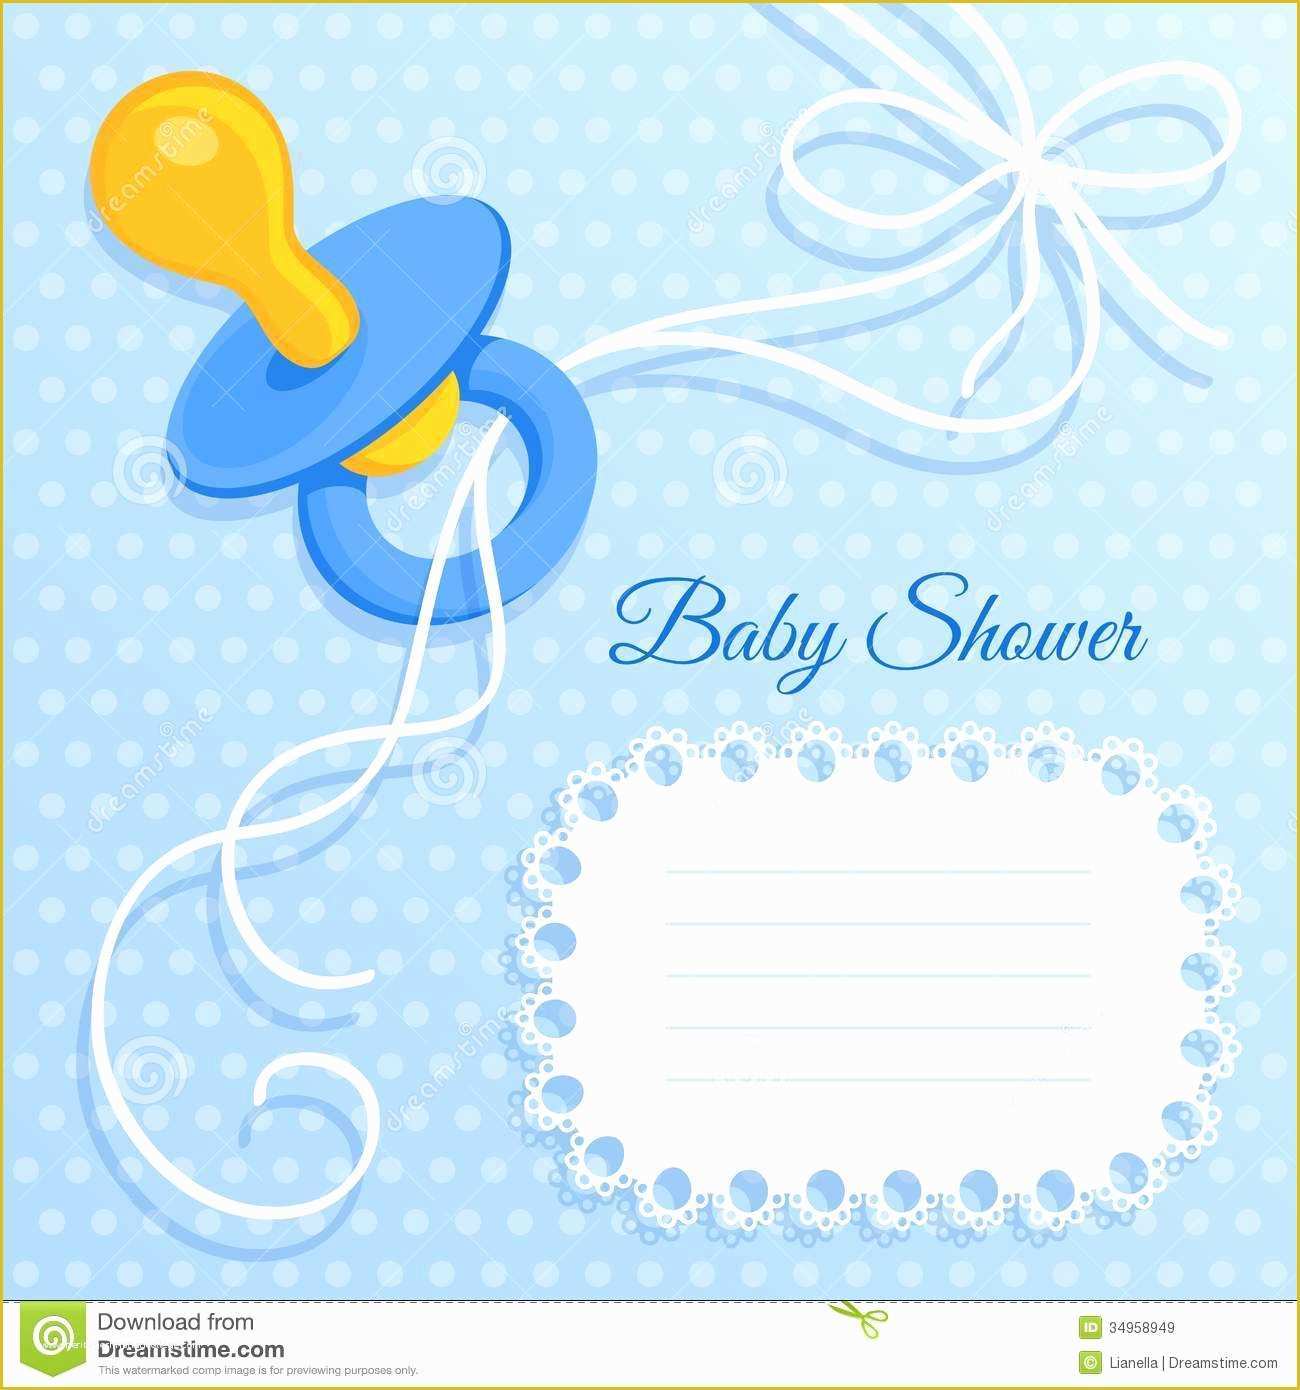 Baby Shower Card Template Free Of Printable Blank Party Cake Ideas and Designs